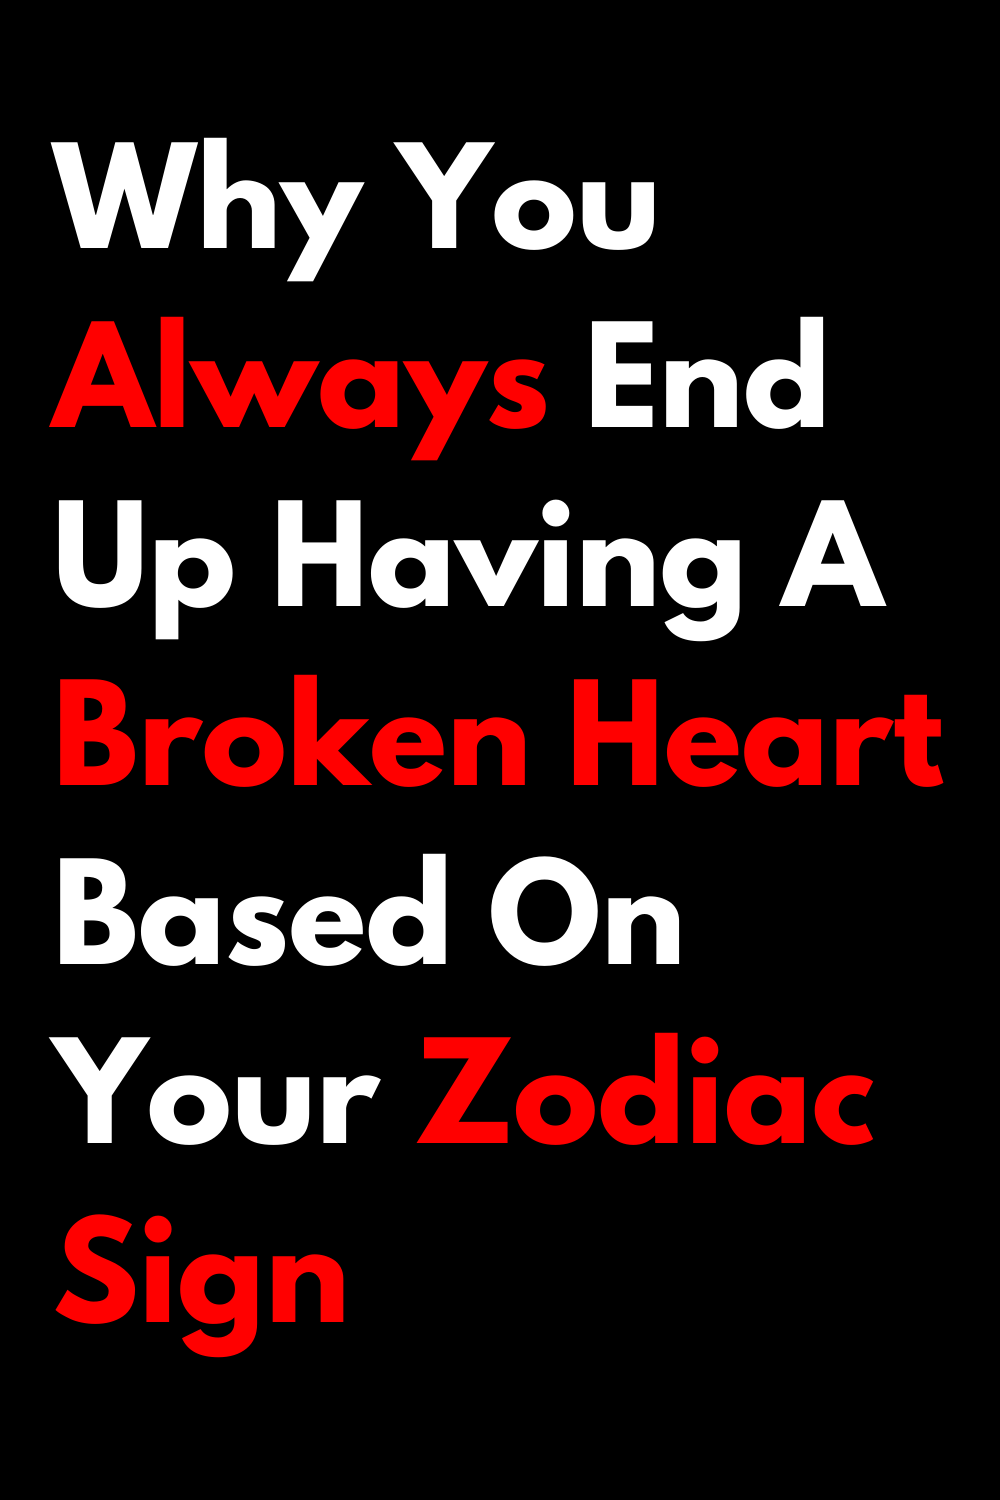 Why You Always End Up Having A Broken Heart Based On Your Zodiac Sign